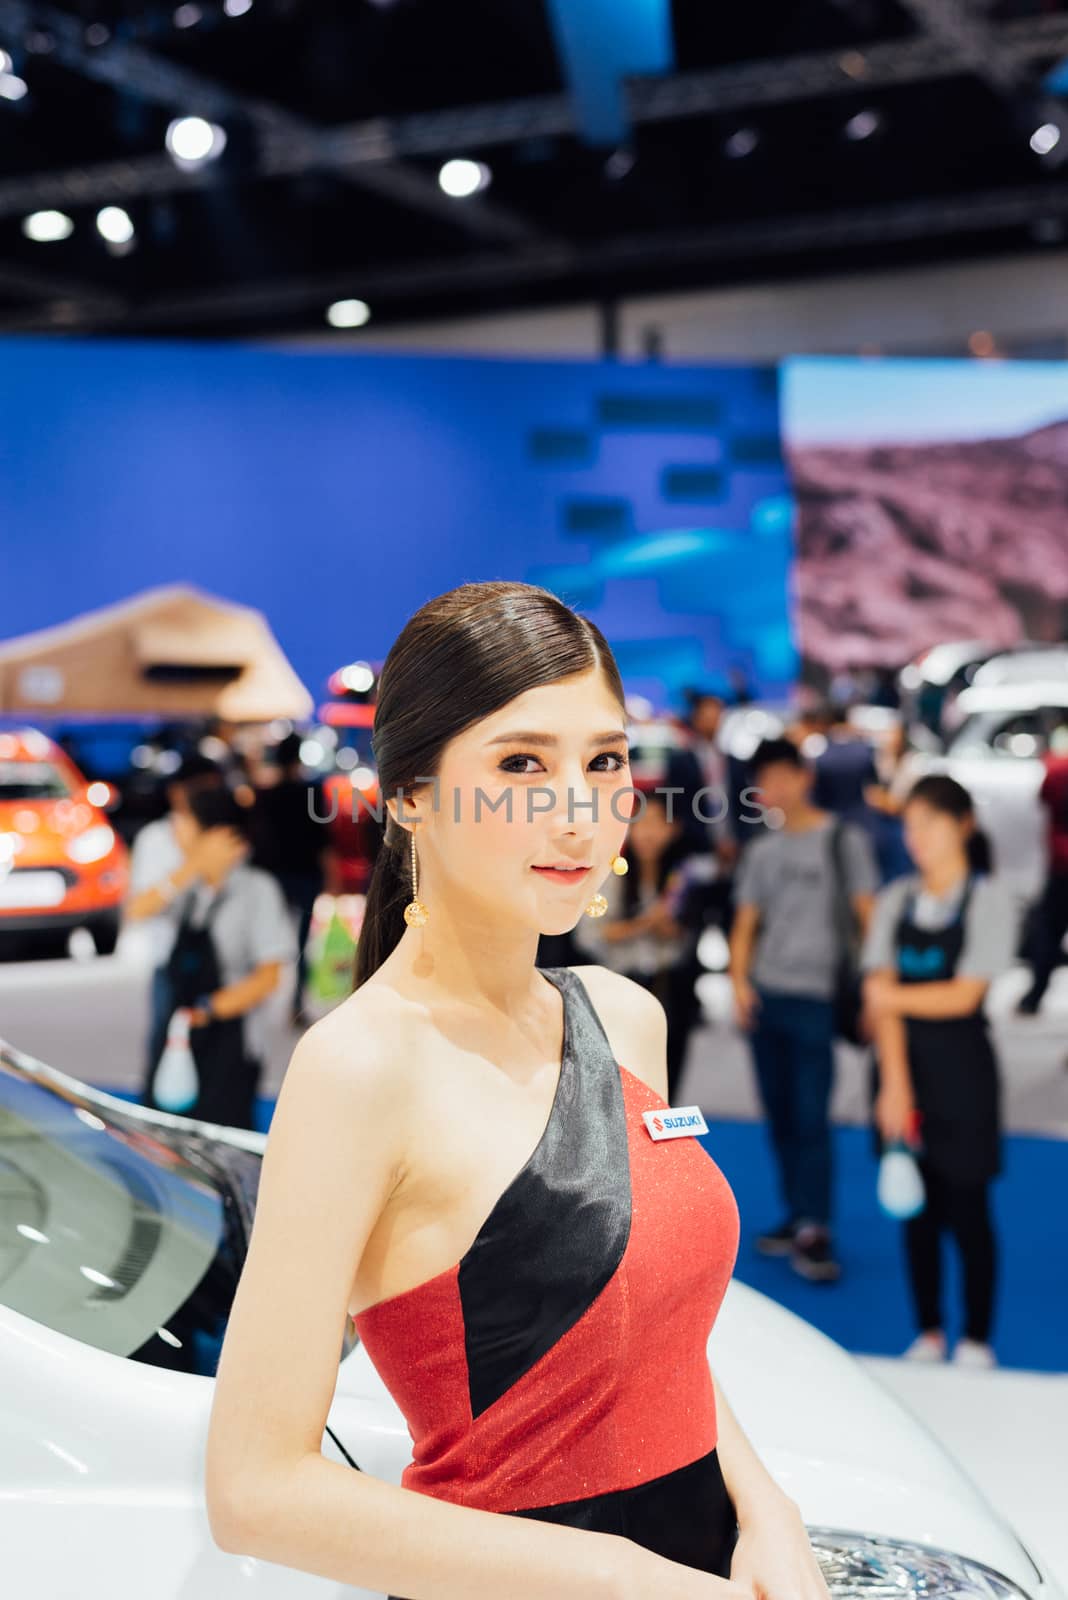 Bangkok, Thailand - March 31, 2018 : Unidentified model pretty lady beauty and sexy on display in car show event. This a open event no need press credentials required.